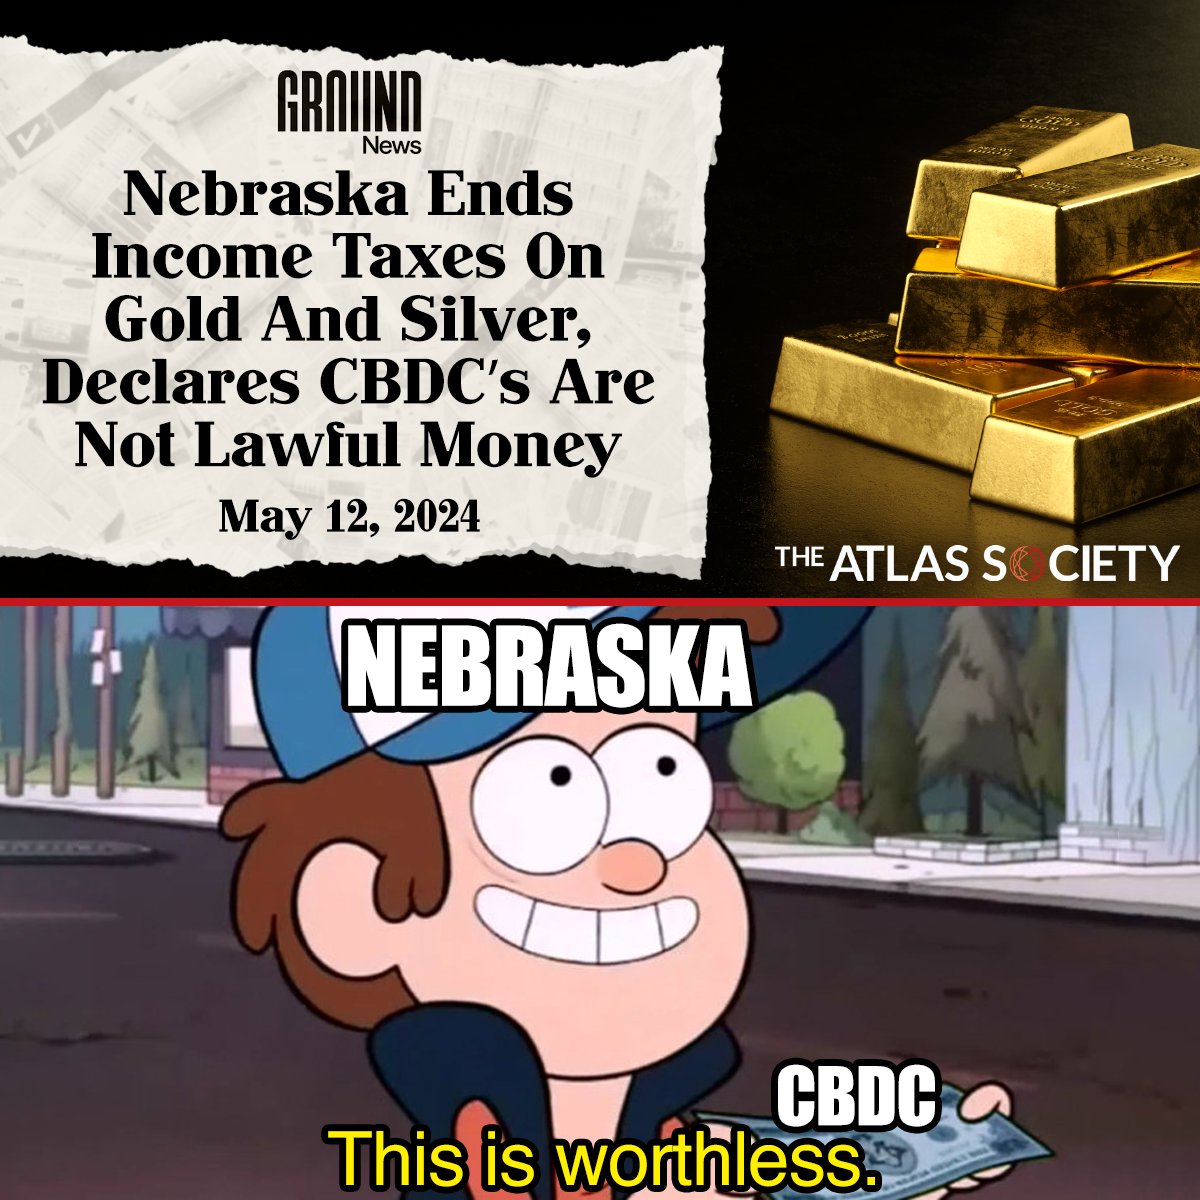 A win for The People of Nebraska #LaissezFaire #Economy #CBDC #AynRand